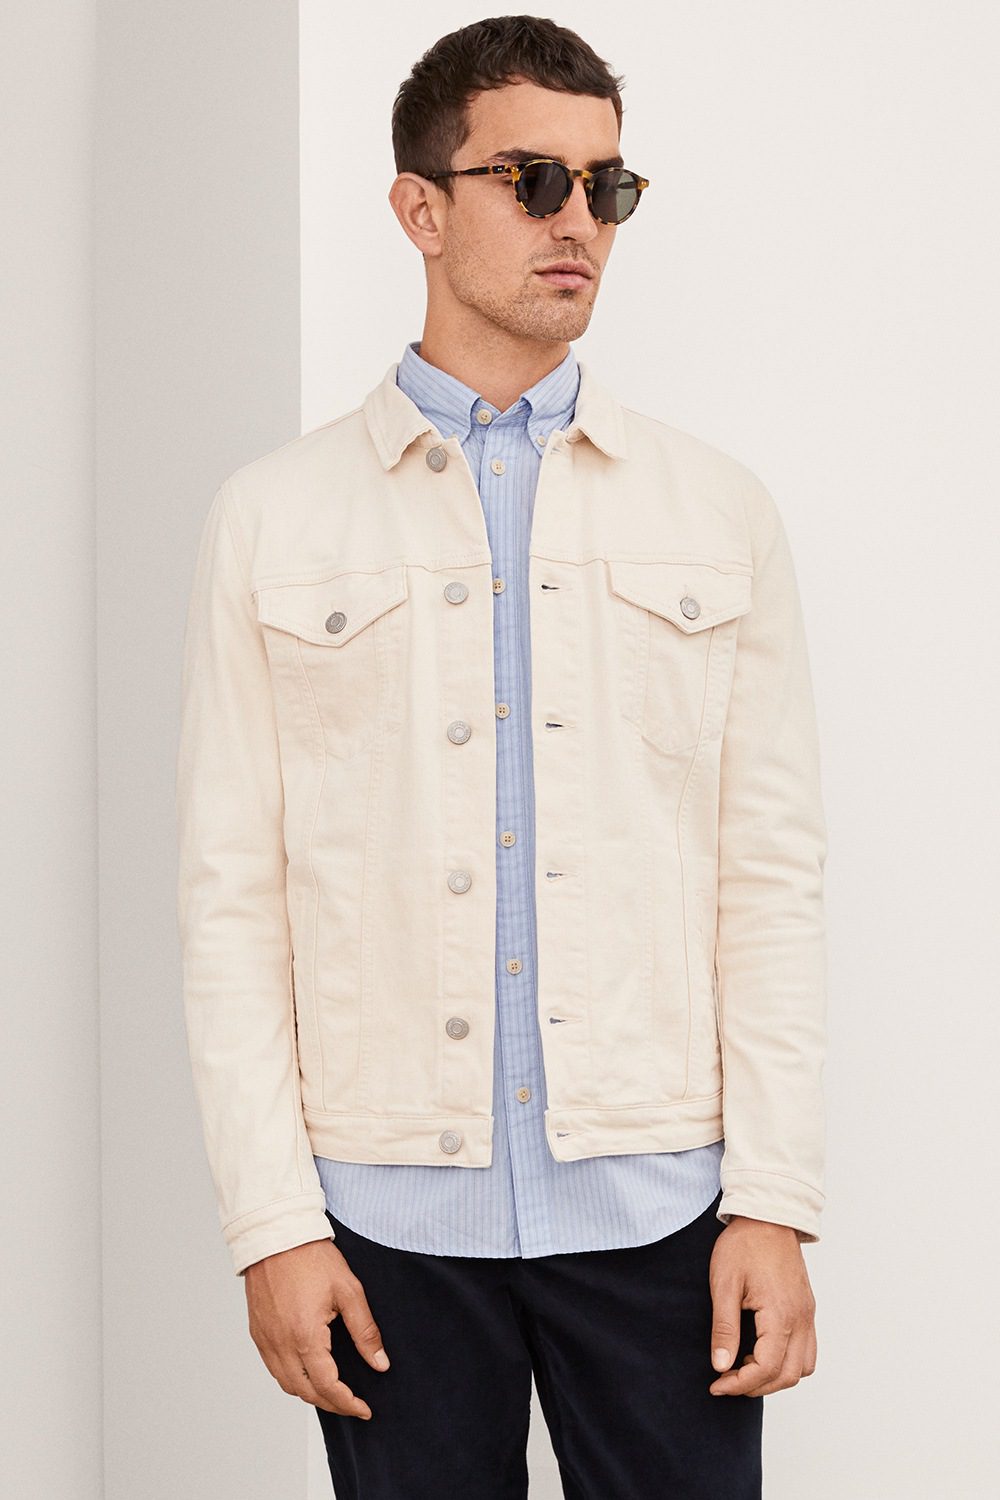 OffWhite Mens Denim Shirts  Clothing  Stylicy India